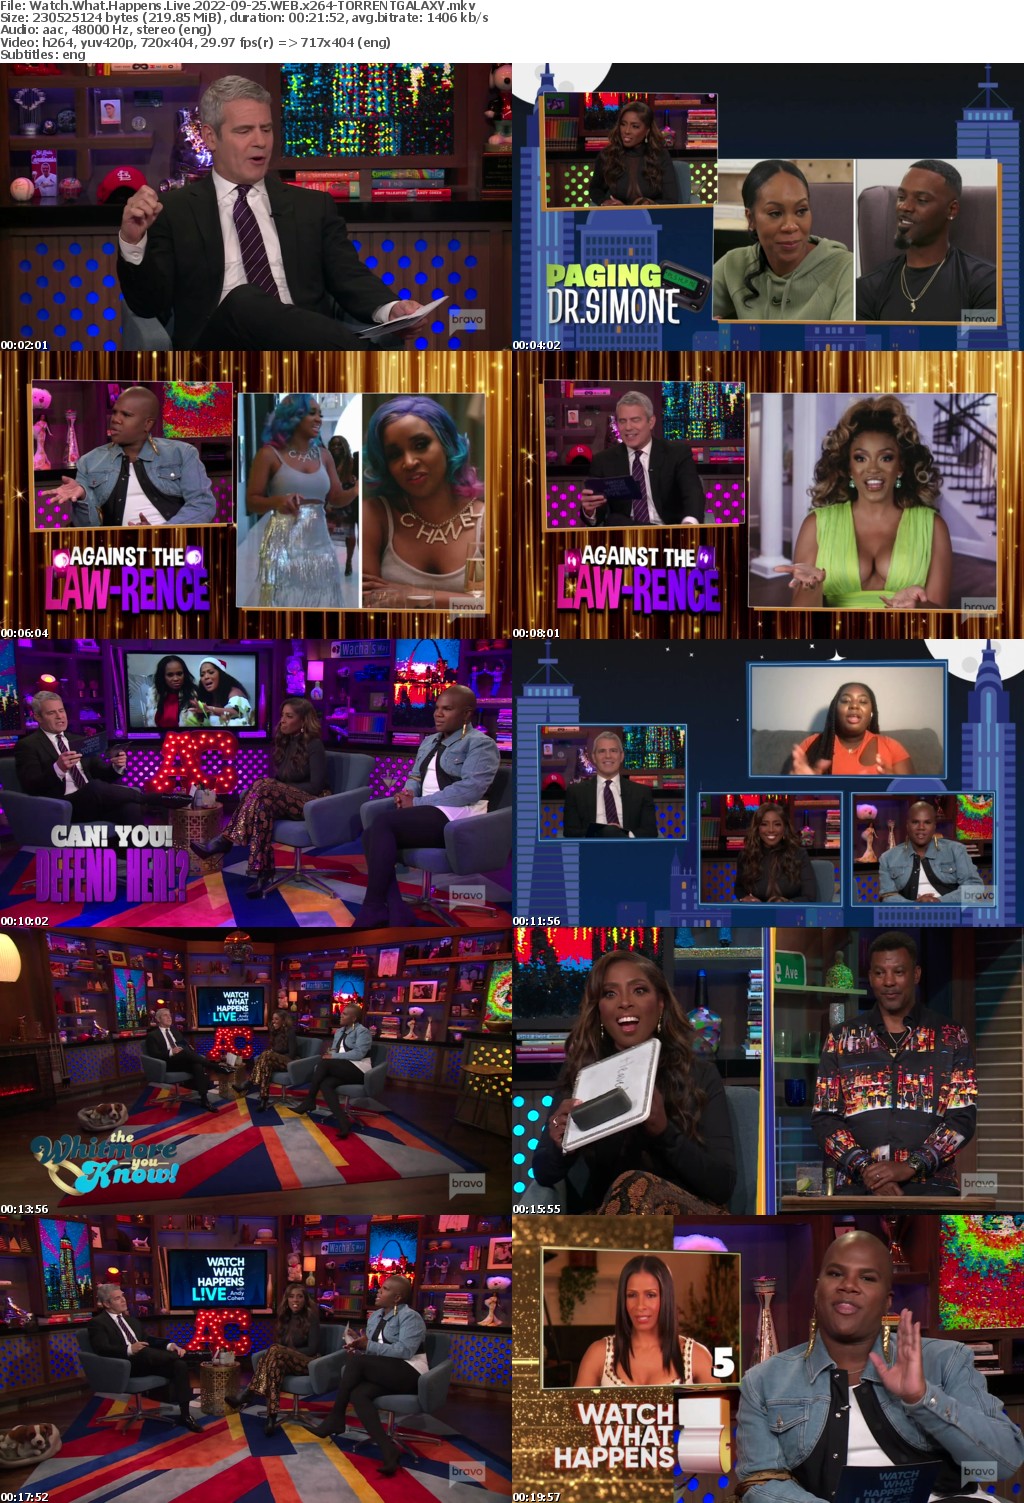 Watch What Happens Live 2022-09-25 WEB x264-GALAXY